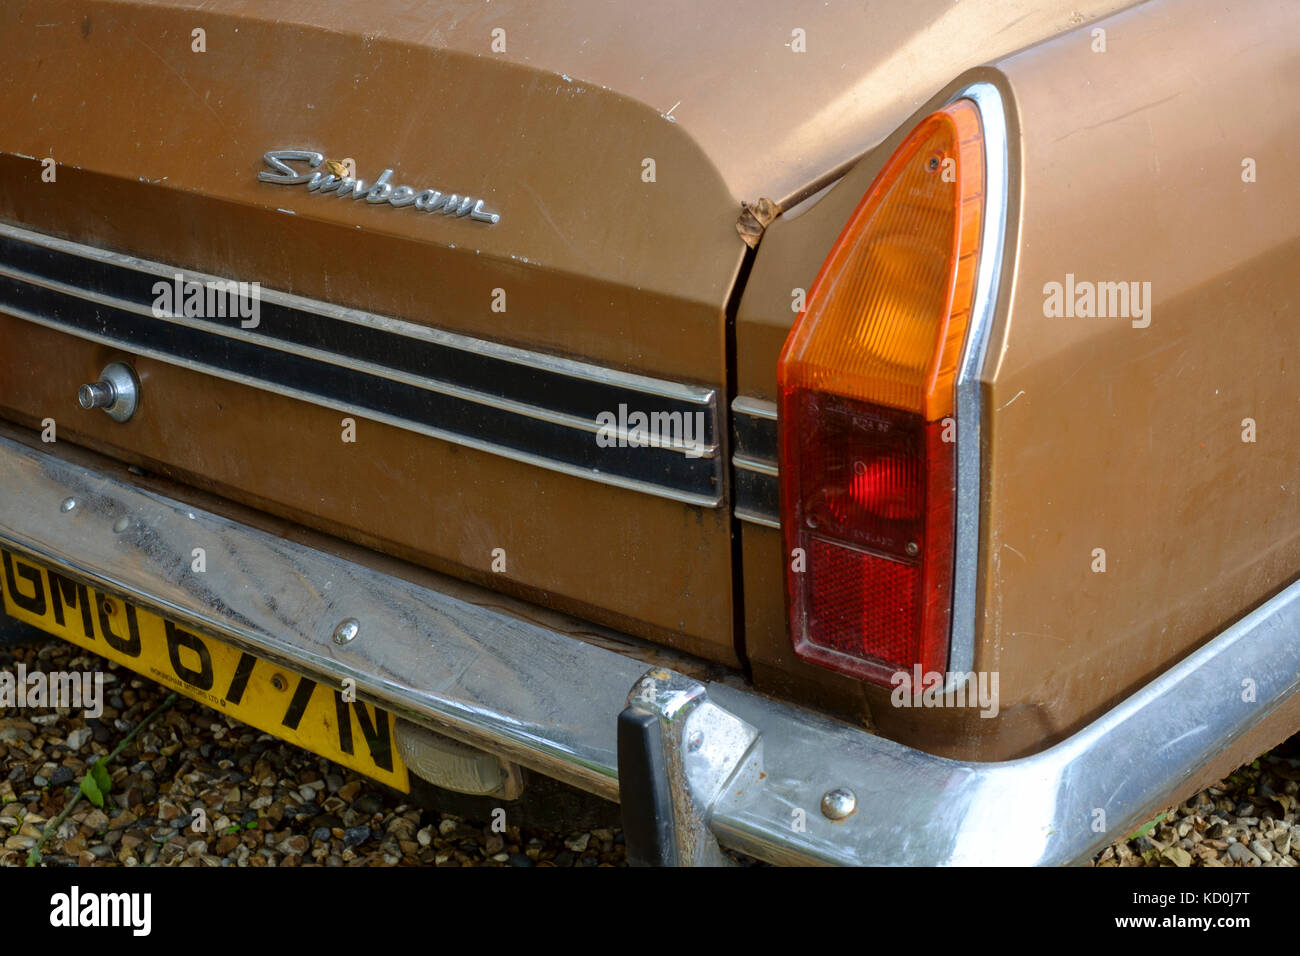 a barn find of a british sunbeam rapier car from the 1970s ready for restoration as a project seen from the rear Stock Photo